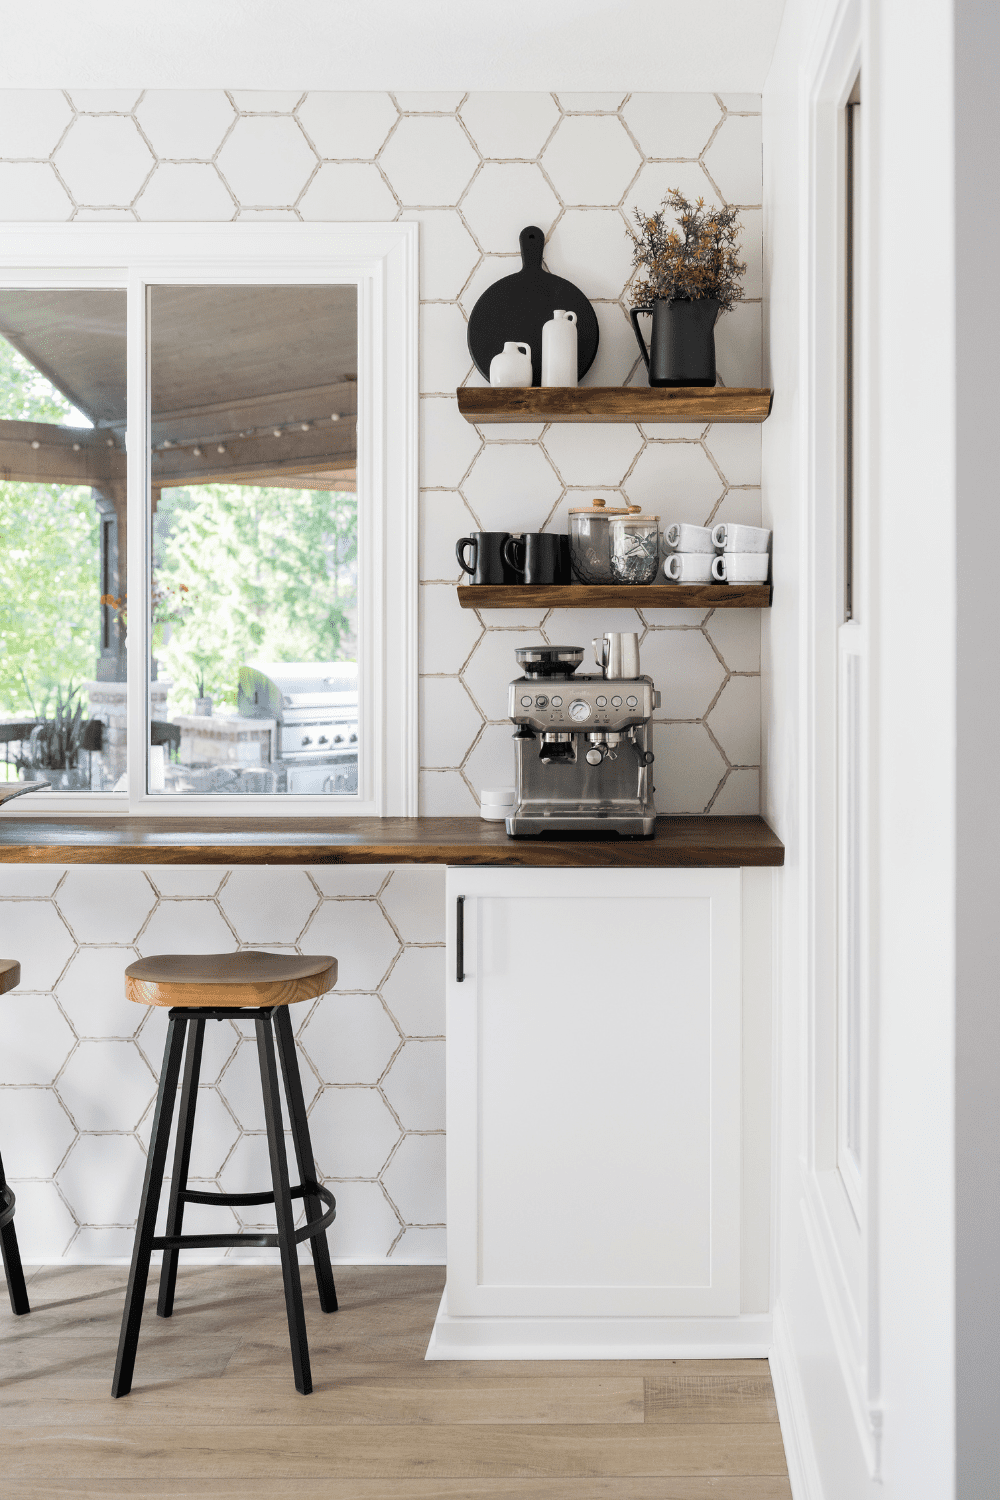 Nicholas Design Build | A white kitchen with stools and a window.